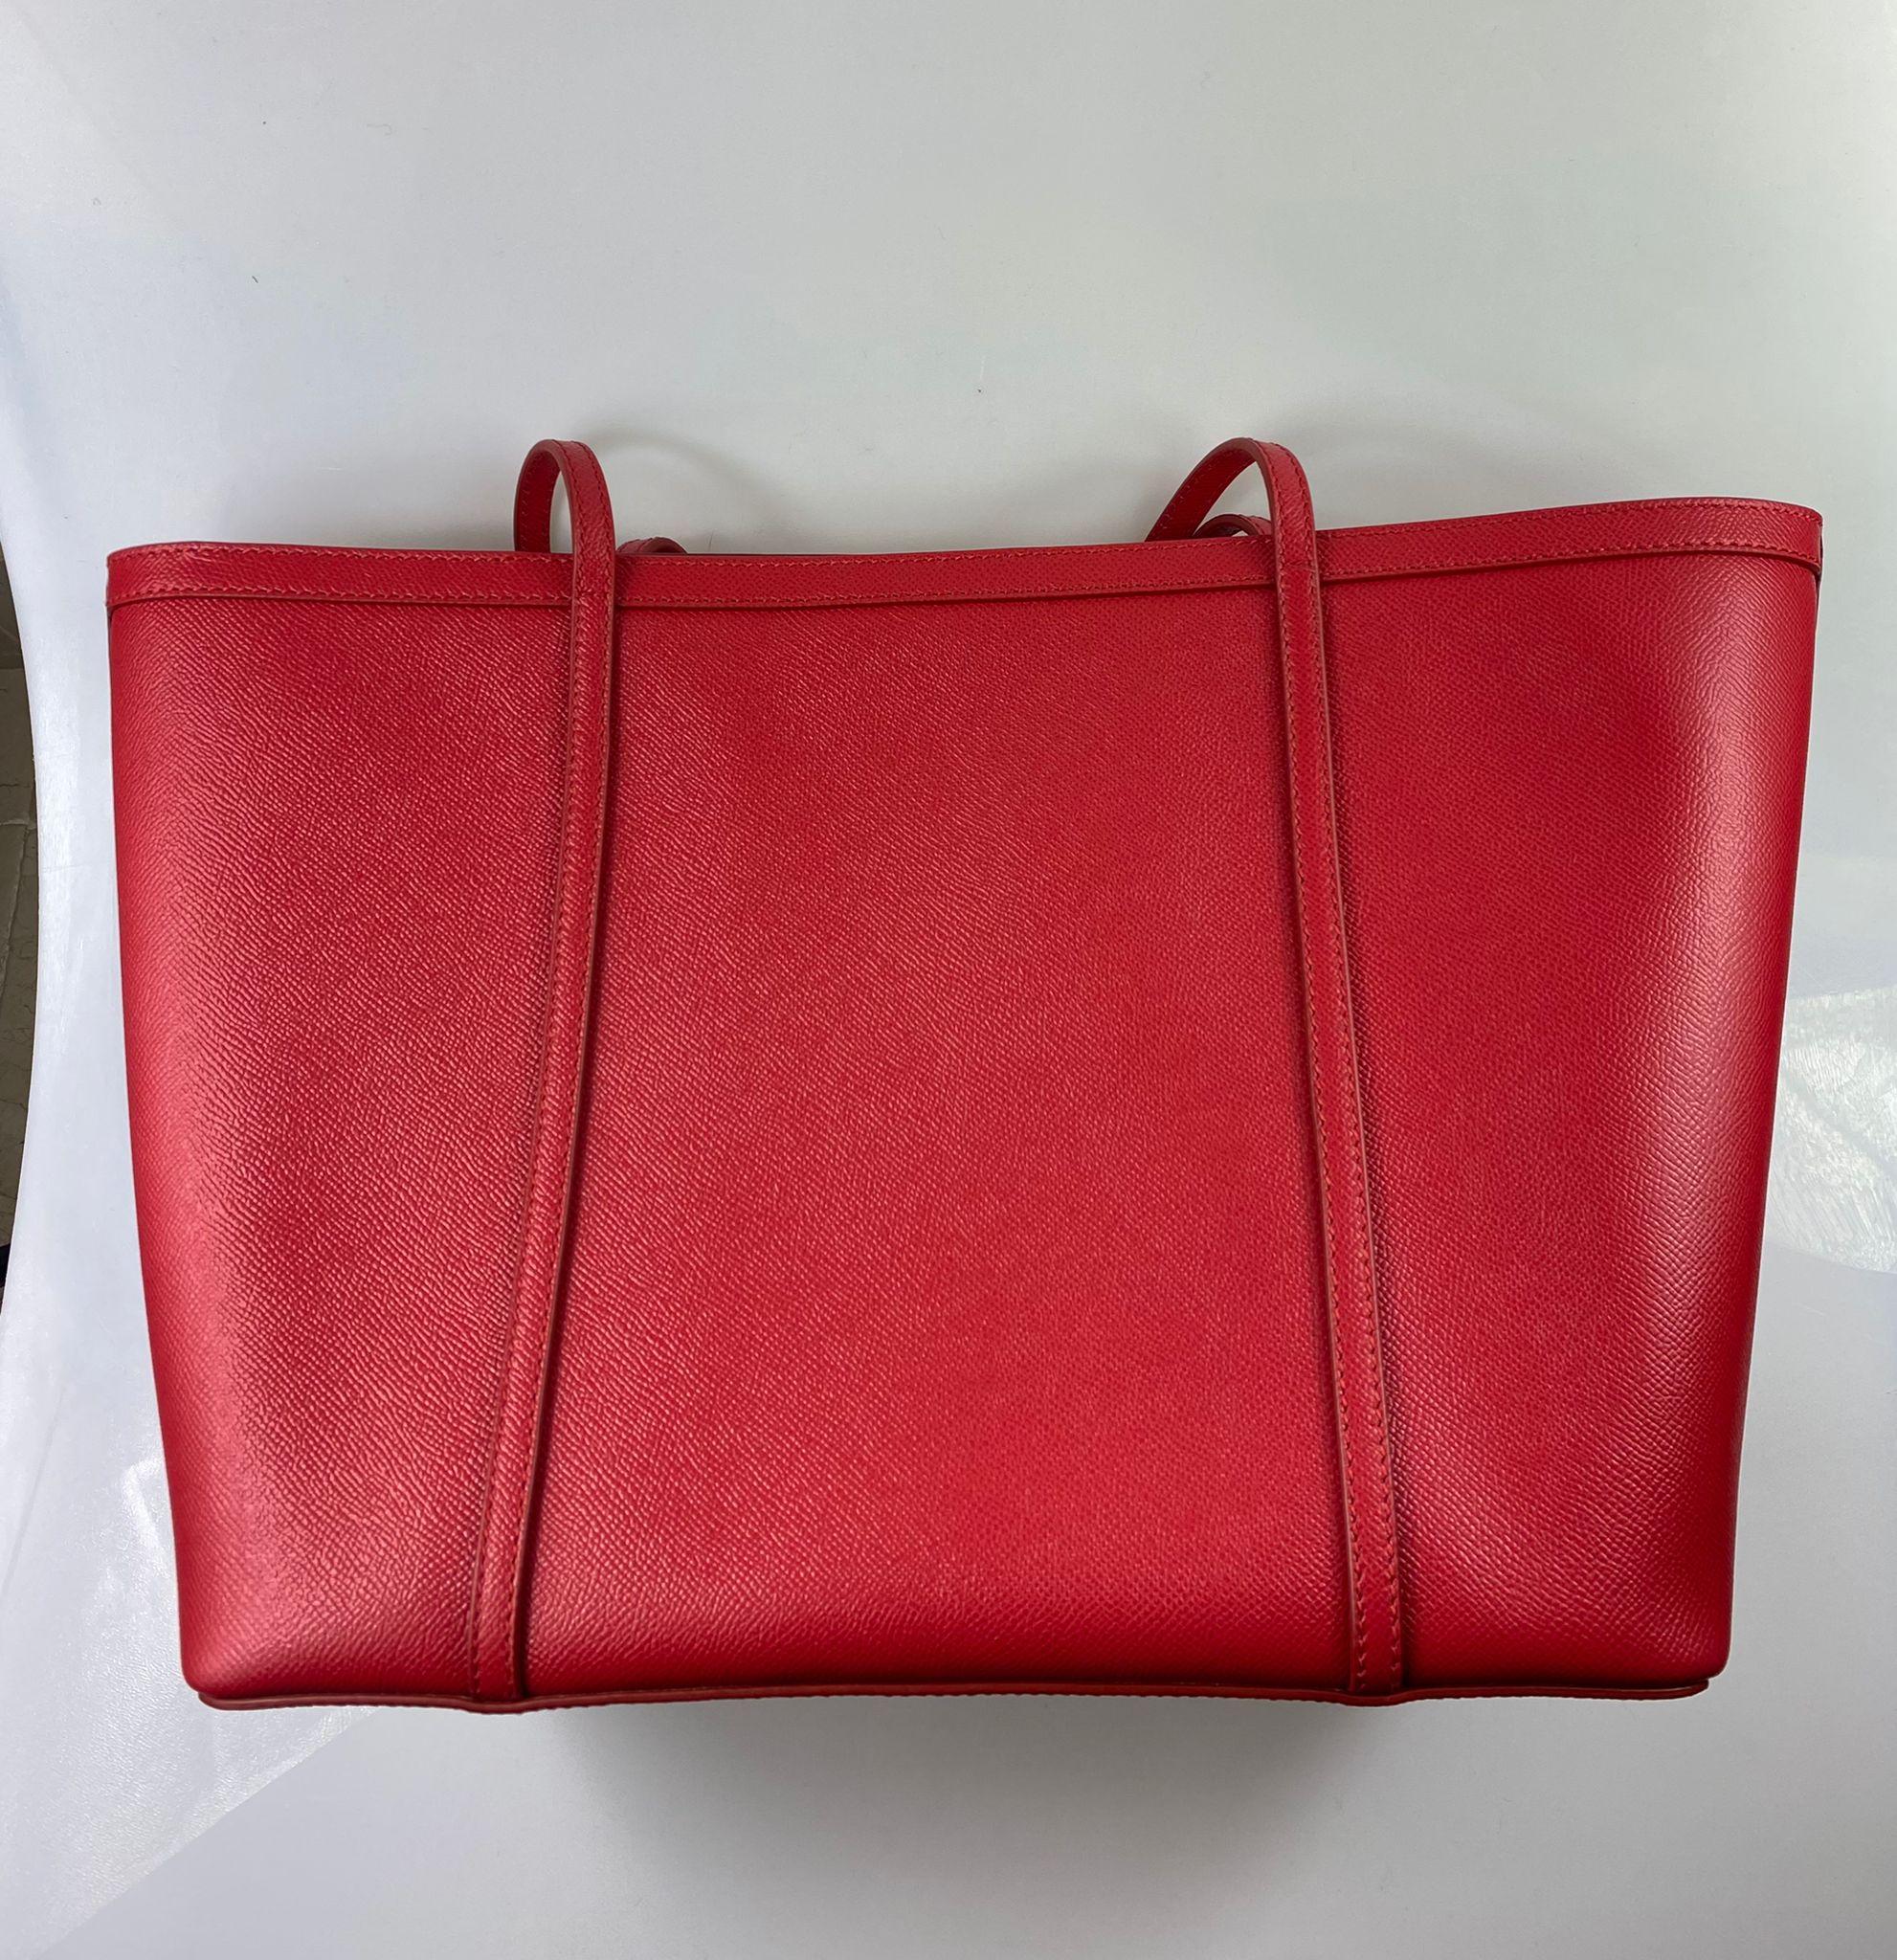 Absolutely stunning, 100% Authentic, brand new with tags Dolce & Gabbana leather shopping tote bag.

Model: Shopping Tote Bag

Color: Red with gold metal detailing

Material: 100% Leather

Magnetic closure

Logo details

Made in Italy

Very